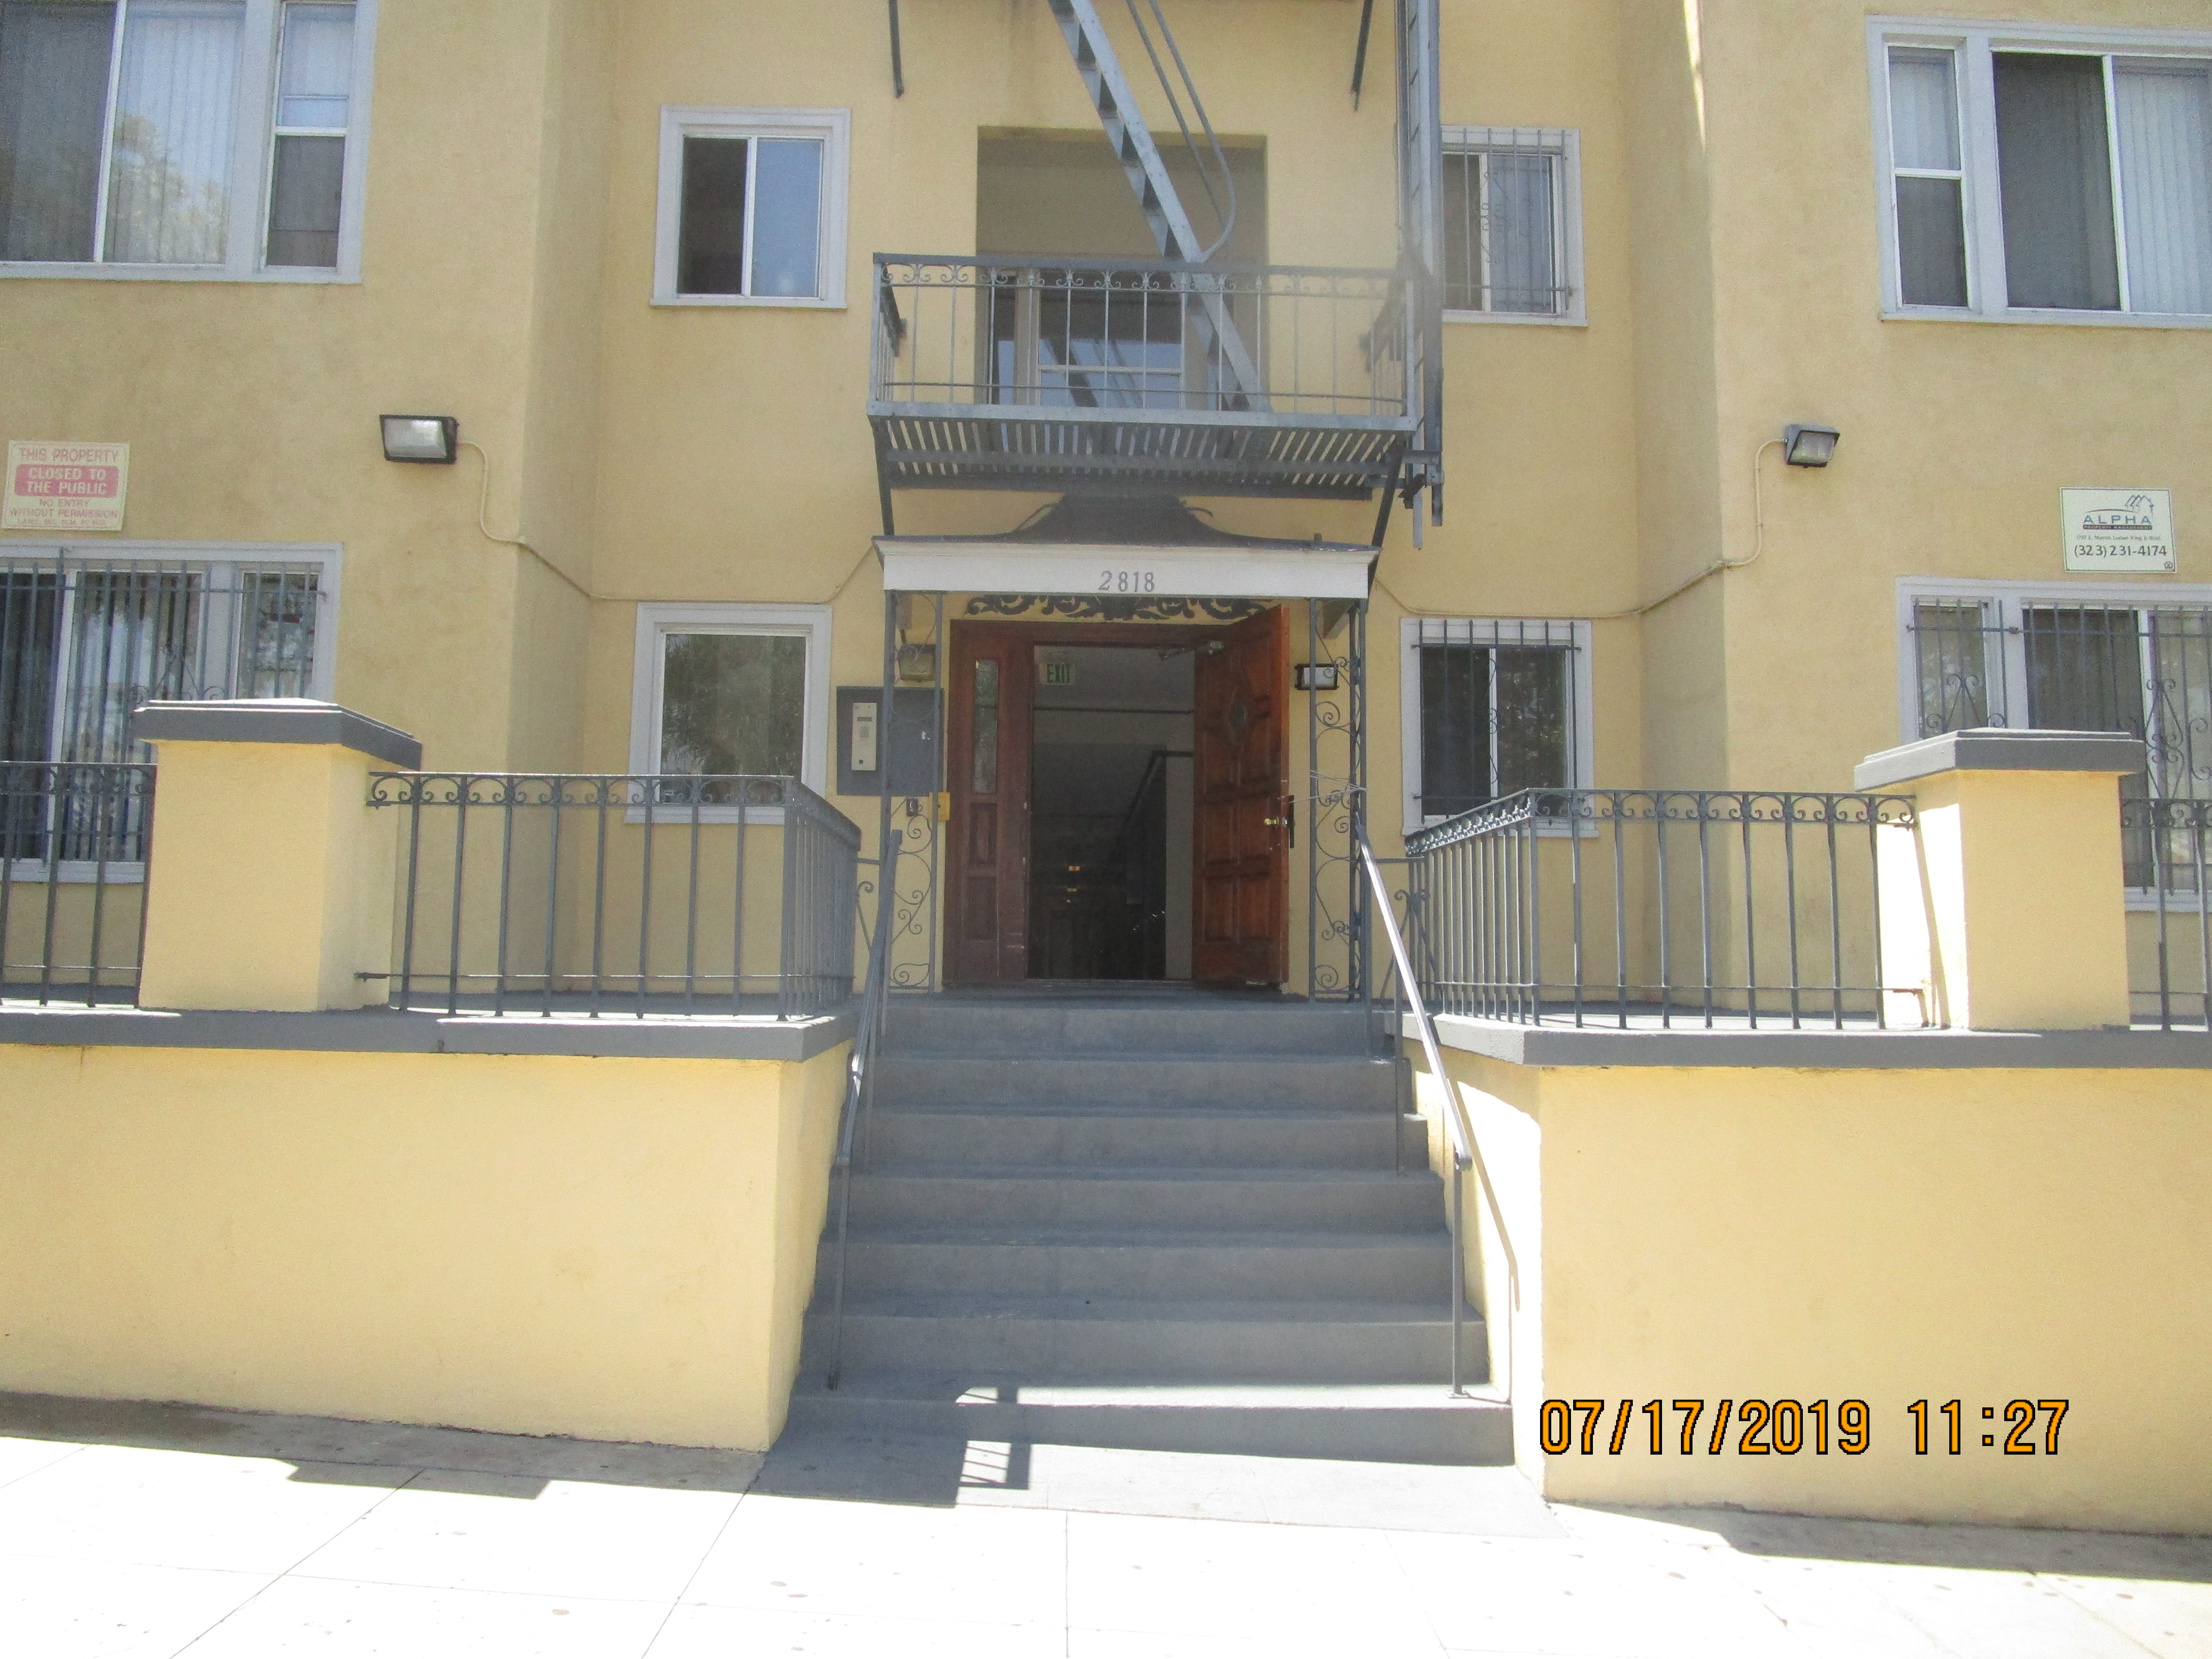 Exterior view of the entrance to Leeward A&B Apartments with steps leading up to it